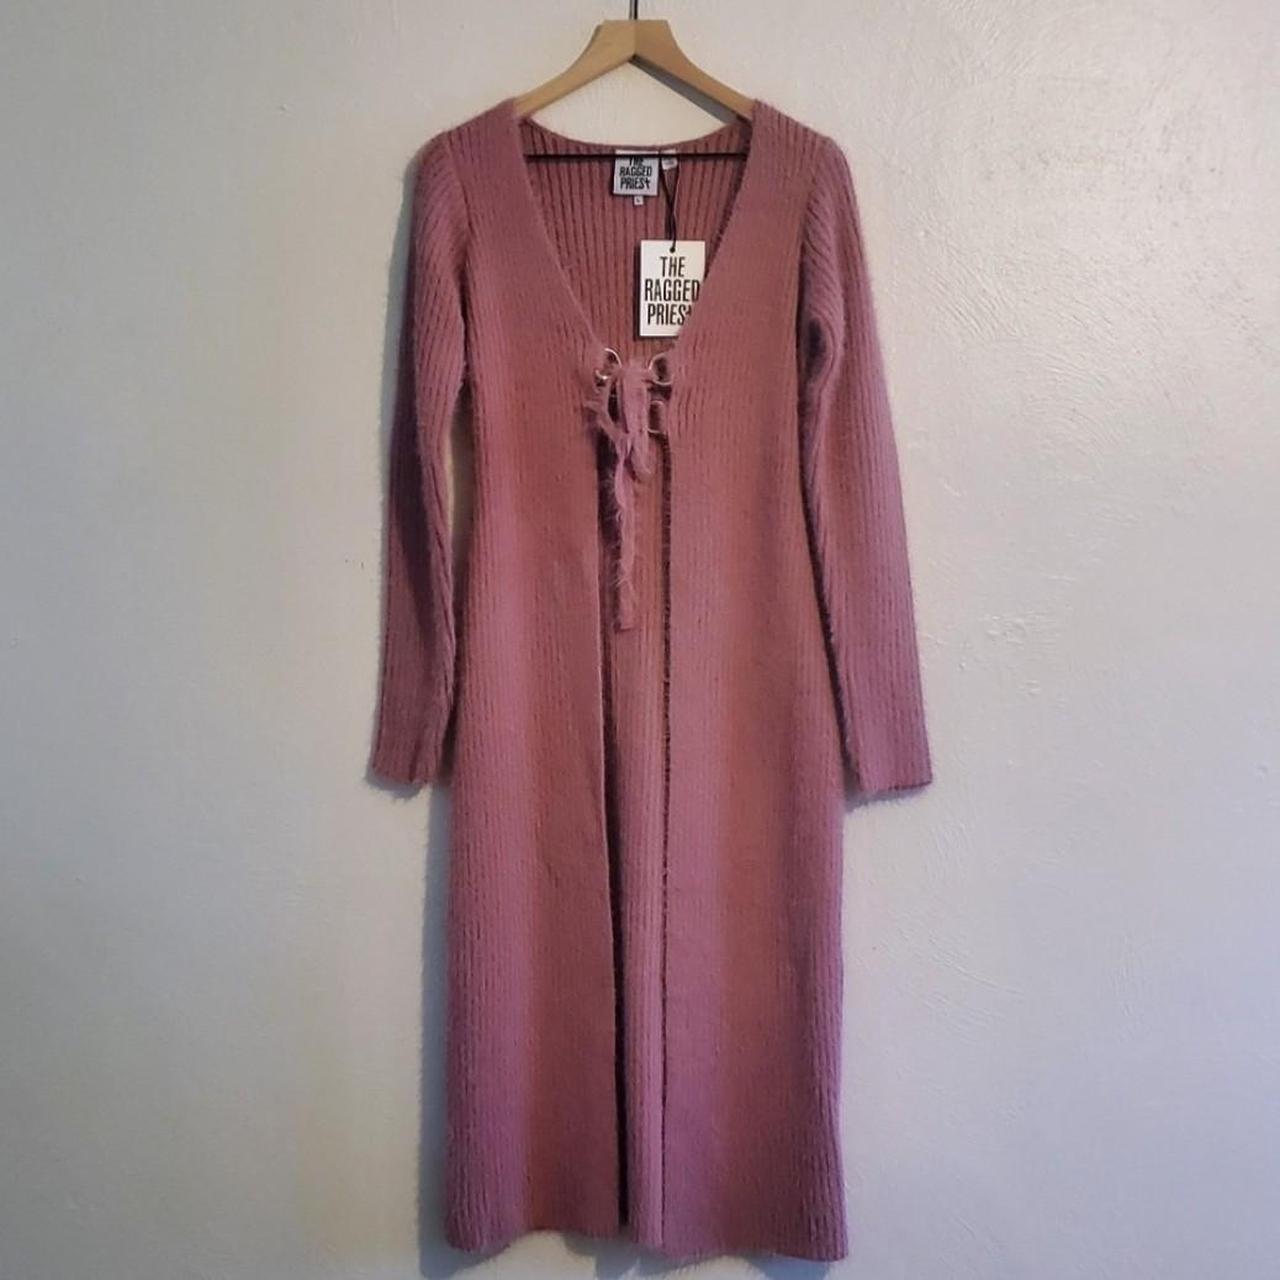 The Ragged Priest Women's Pink and Purple Cardigan